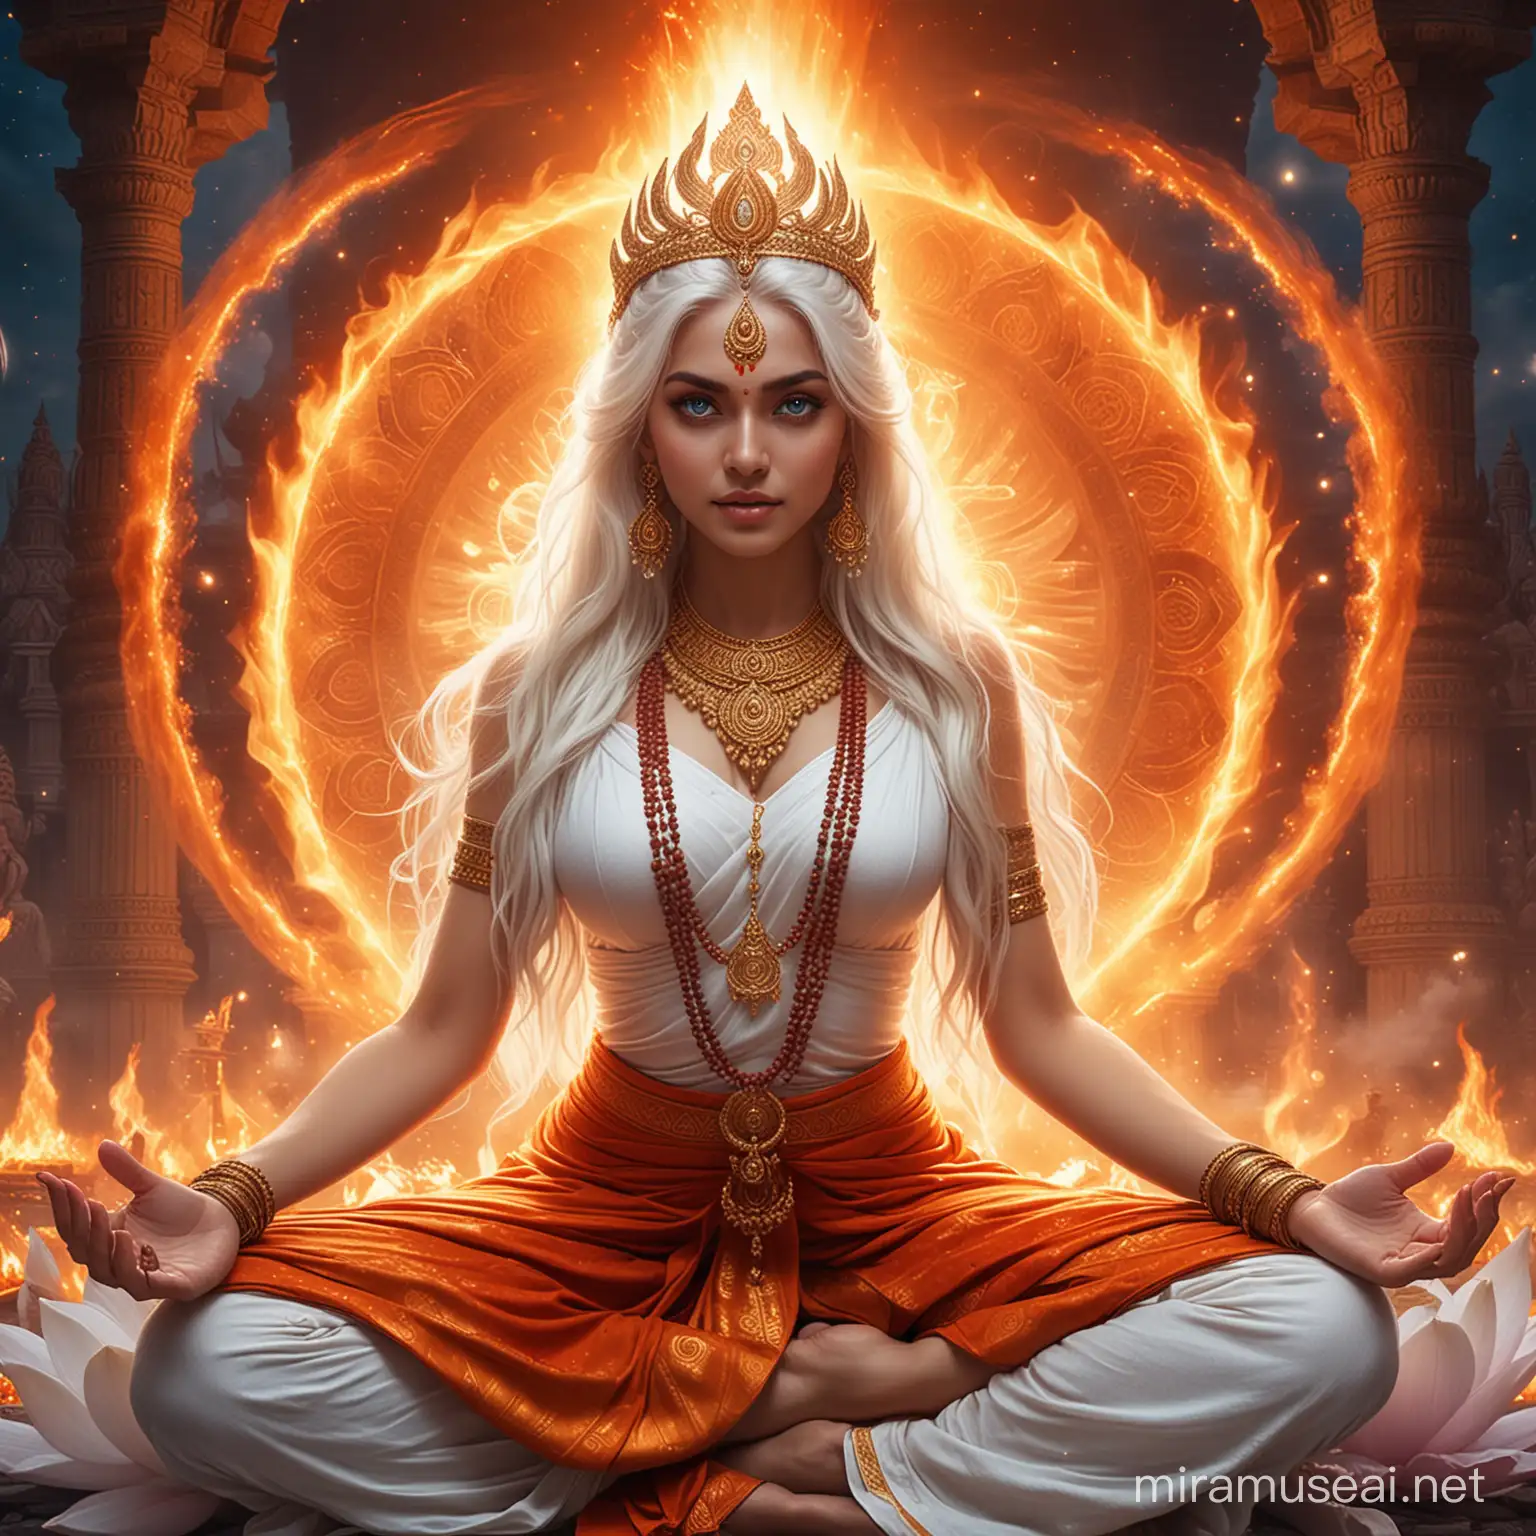 Empress Goddess Meditating in Lotus Position Amid Cosmic Energy and Flames